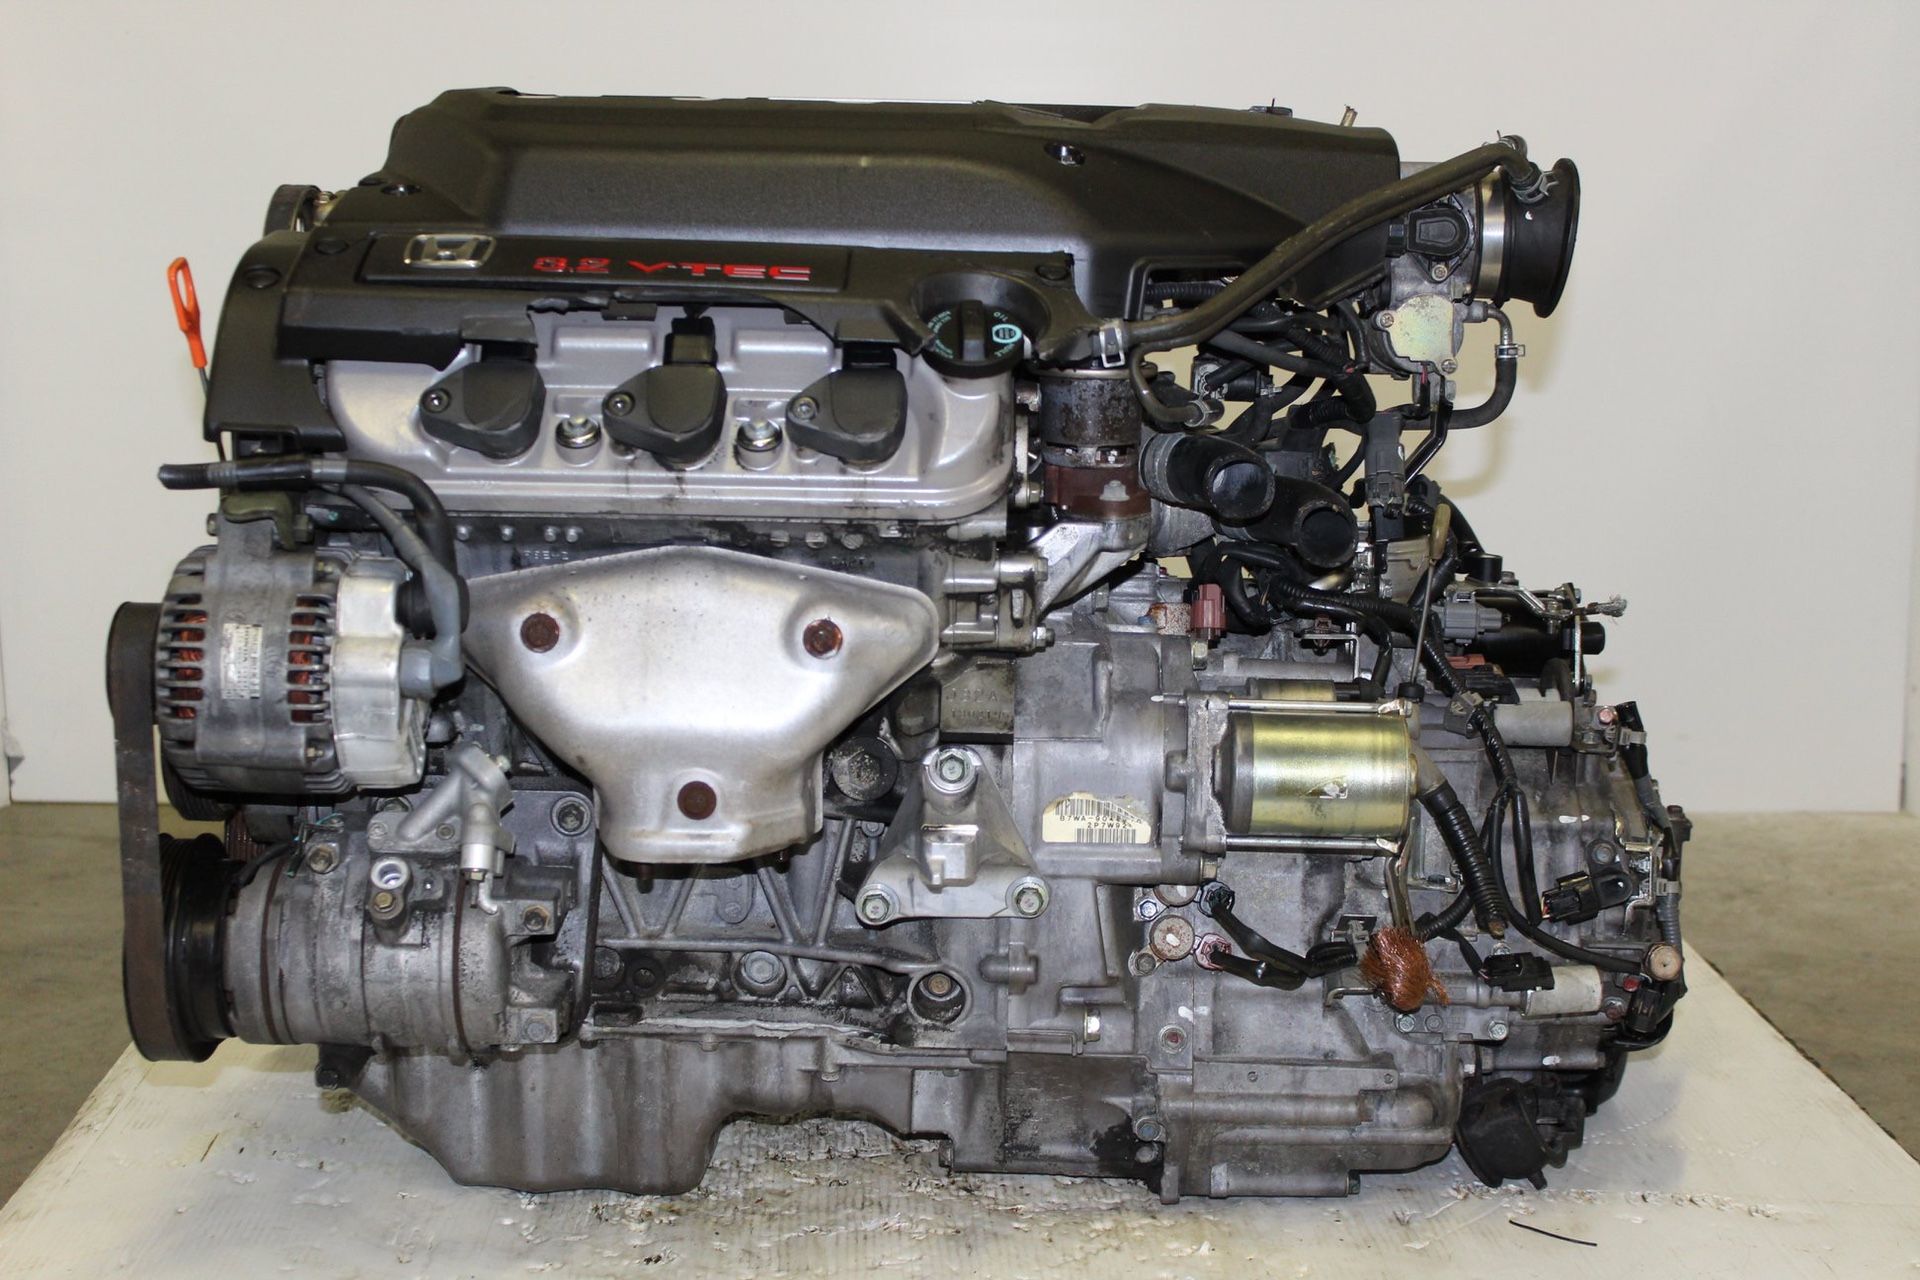 Used low miles 2001 to 2003 ACURA CL/TL J32A TYPE S 3.2L JDM ENGINE MOTOR WITH TRANS